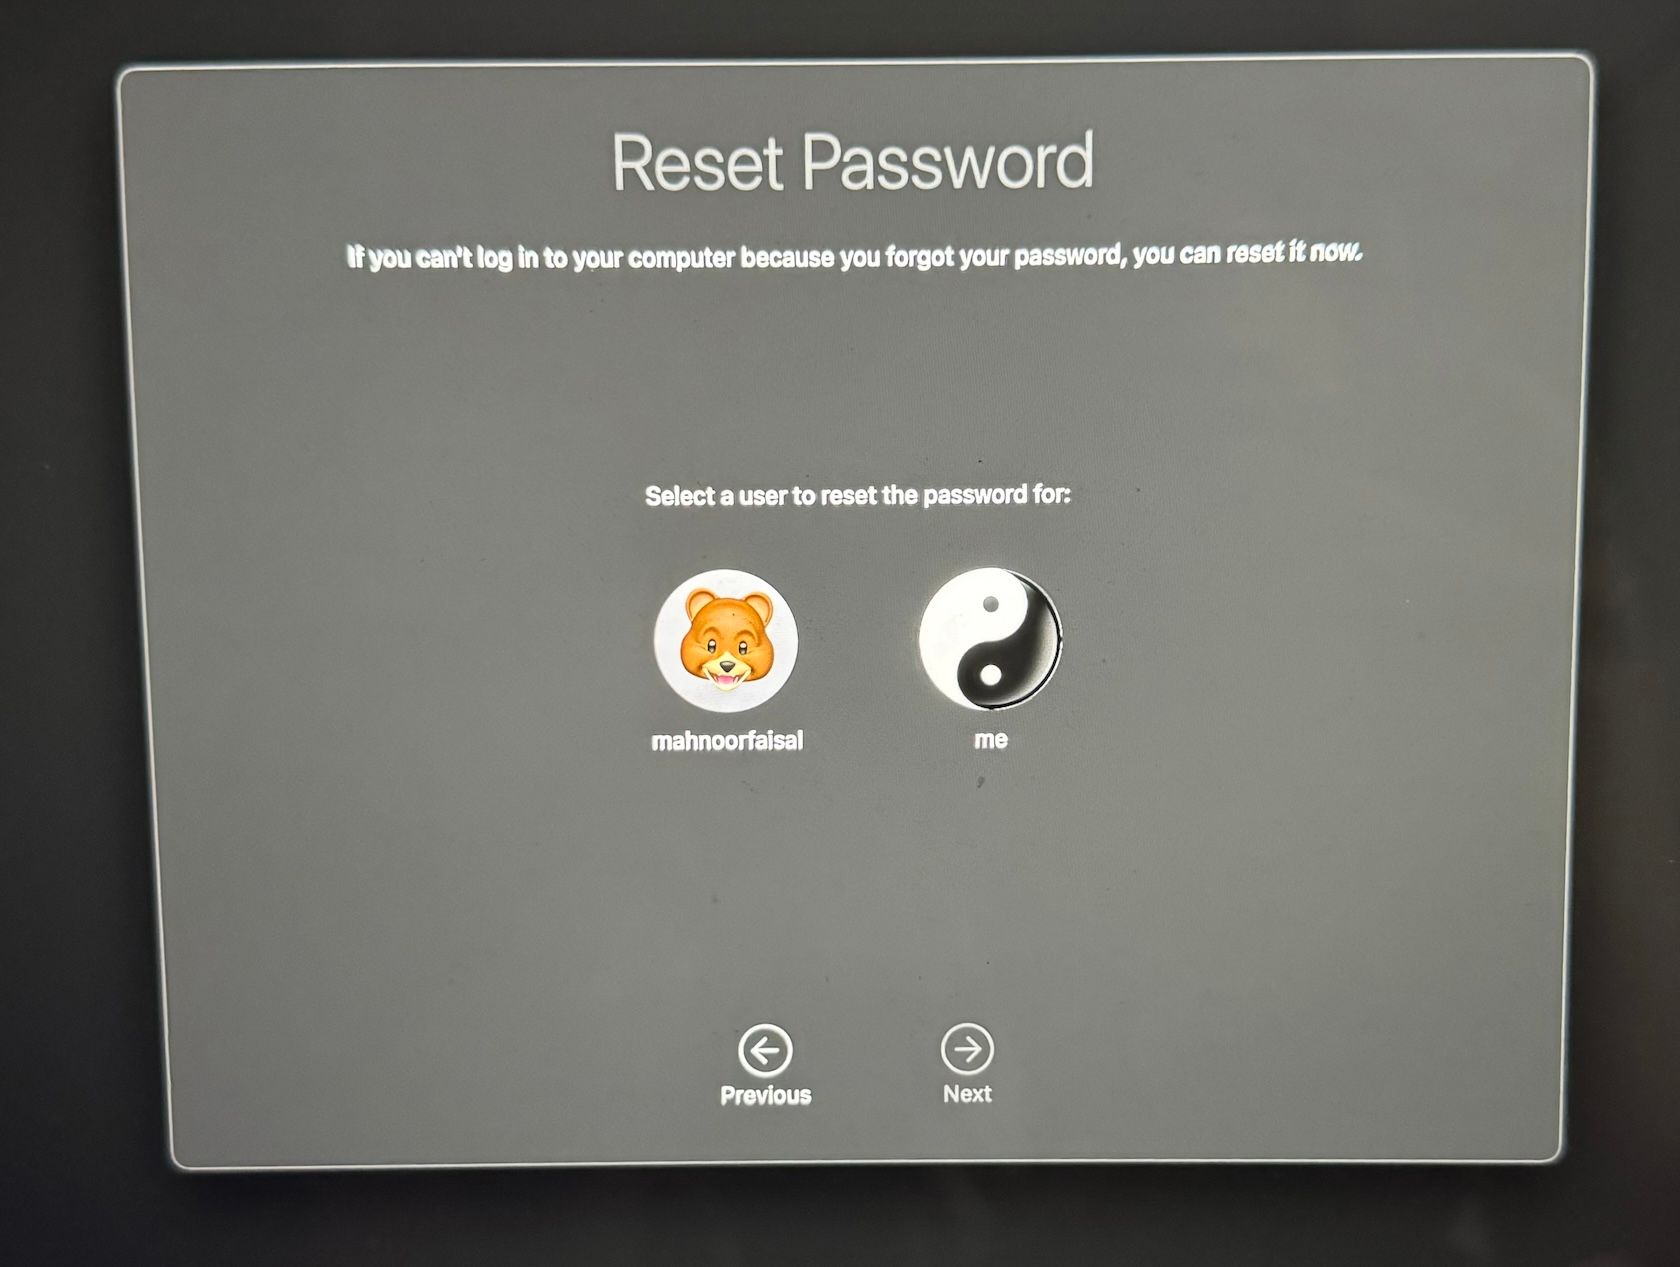 Reset Password screen showing different users on Mac